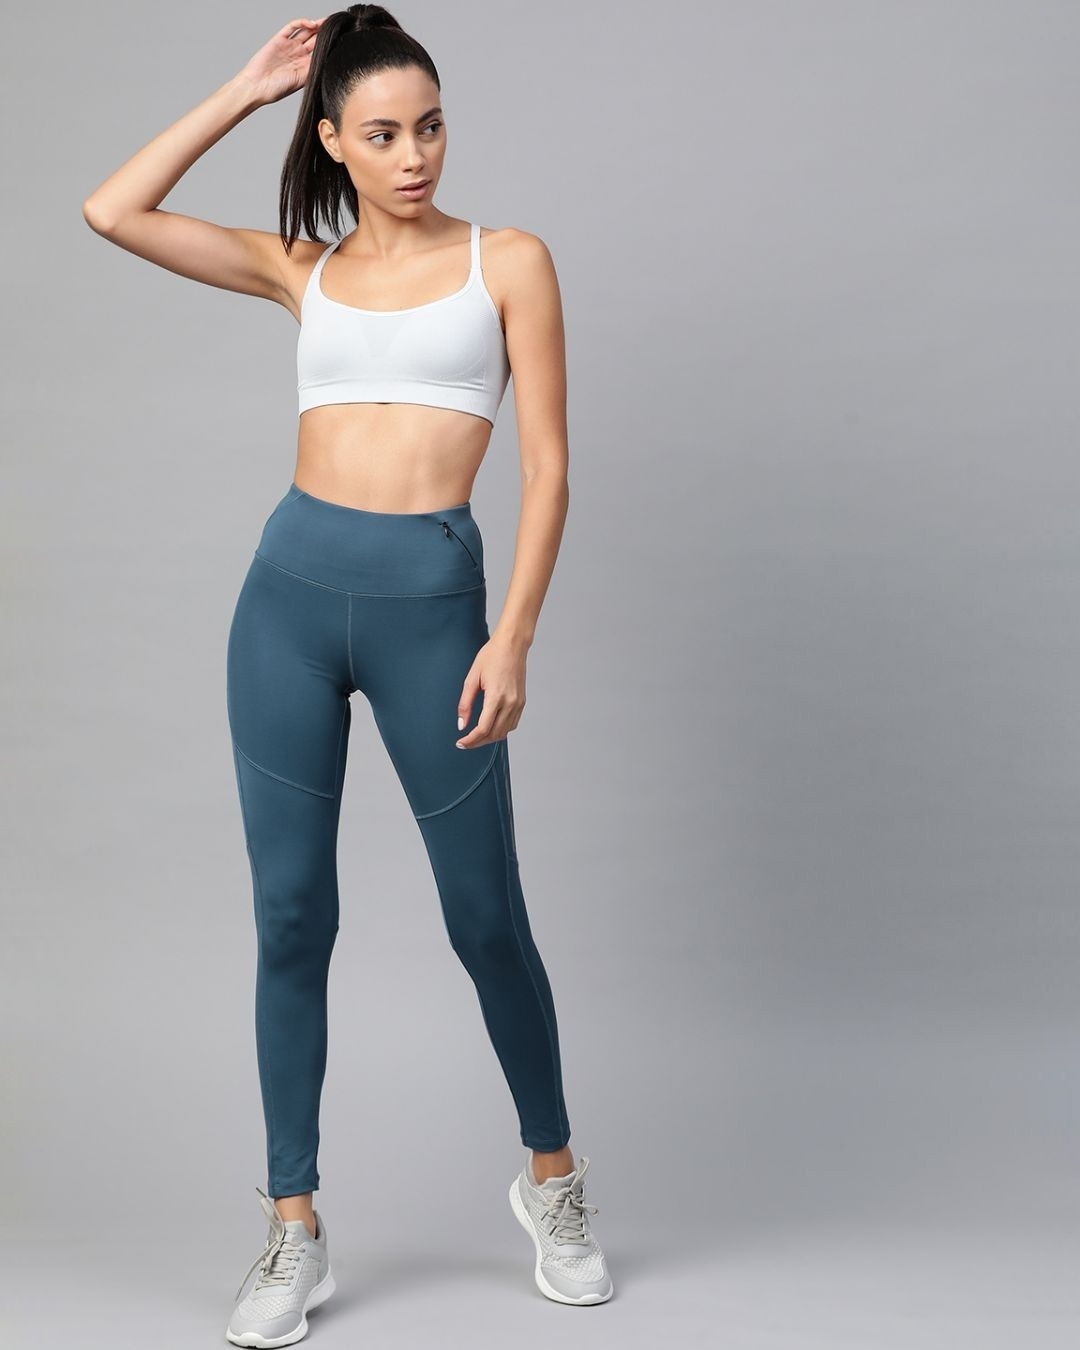 Shop Women's Teal Blue Solid Cropped Tights